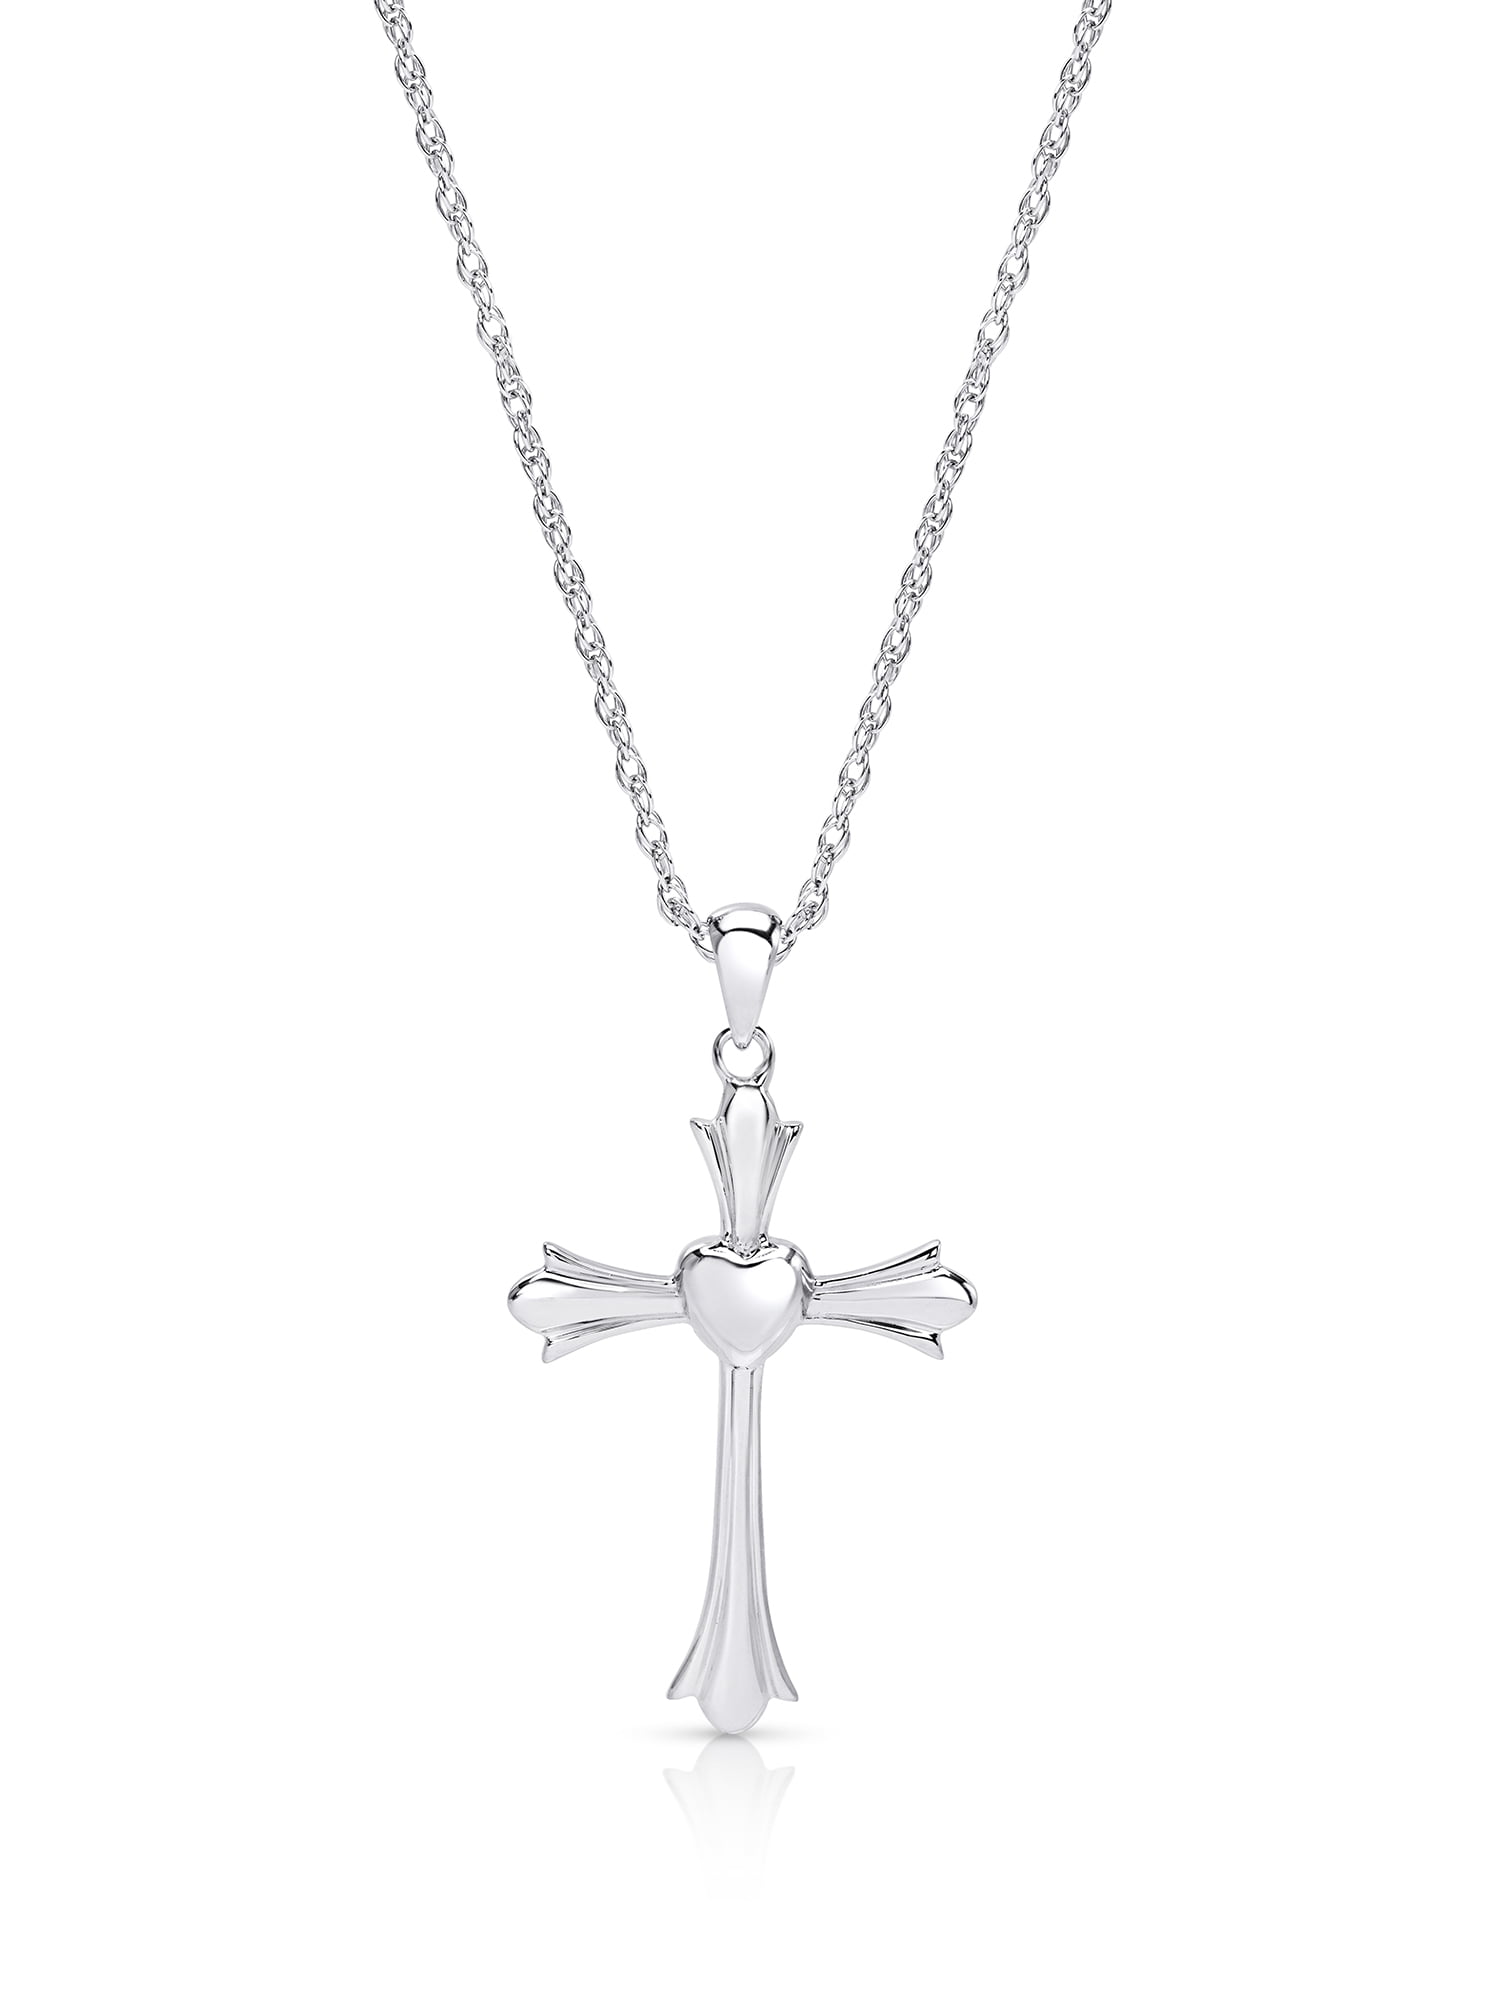 Details about   New Rhodium Plated 925 Sterling Silver Cross with Open Heart Charm Pendant